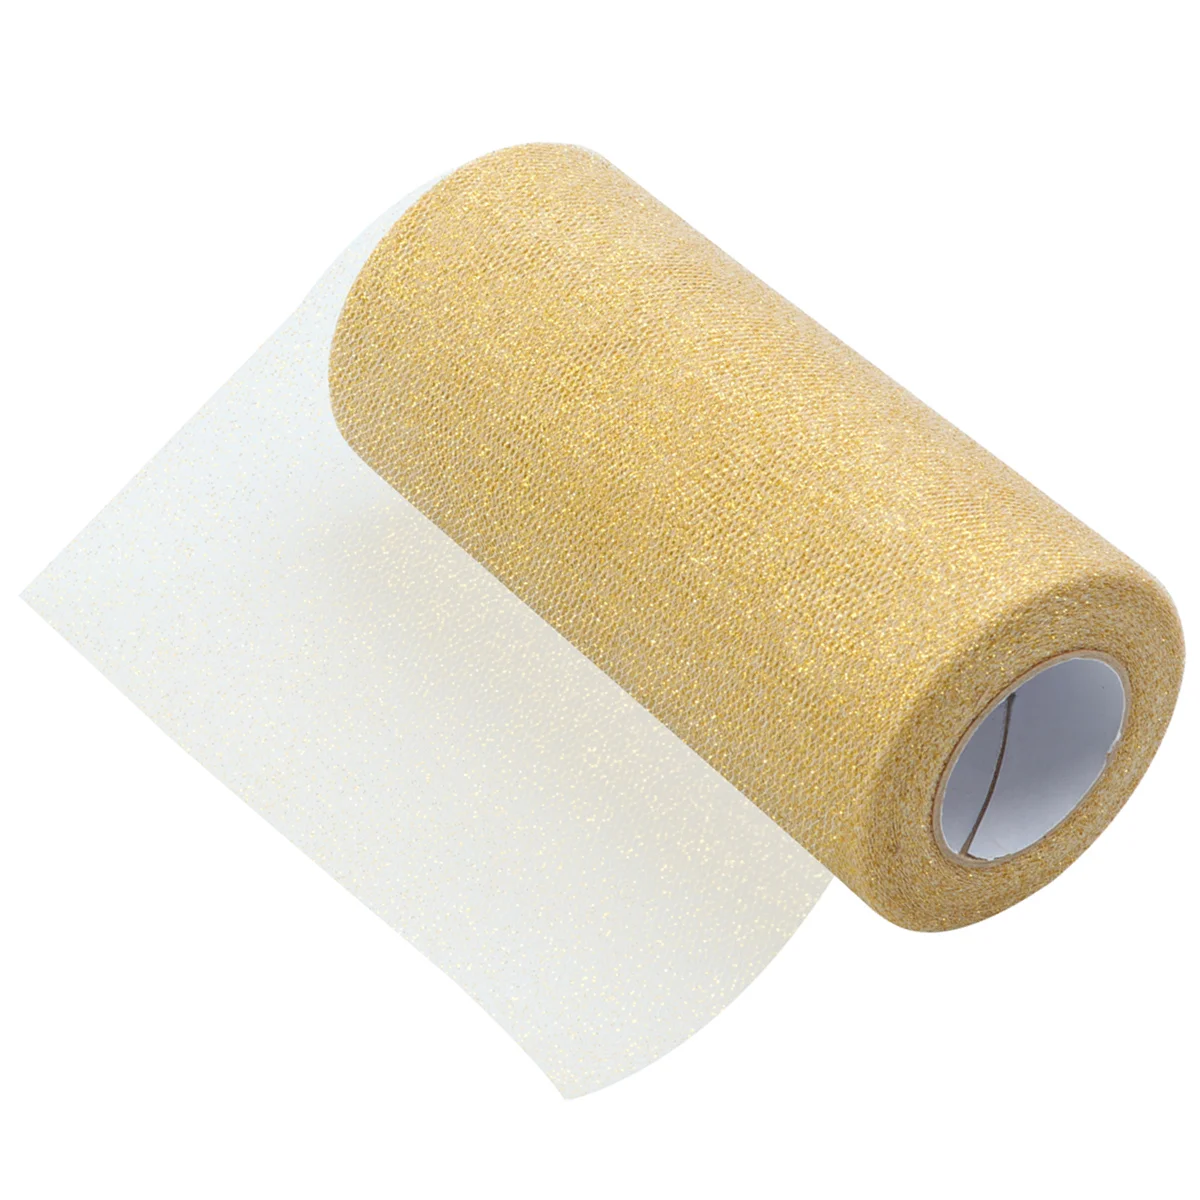 

Tulle Roll Ribbon Rolls Fabric Wedding Spool Sparkling Gold Sewing Glitter Material Decoration Whitetulle Inch Backdrop Mesh